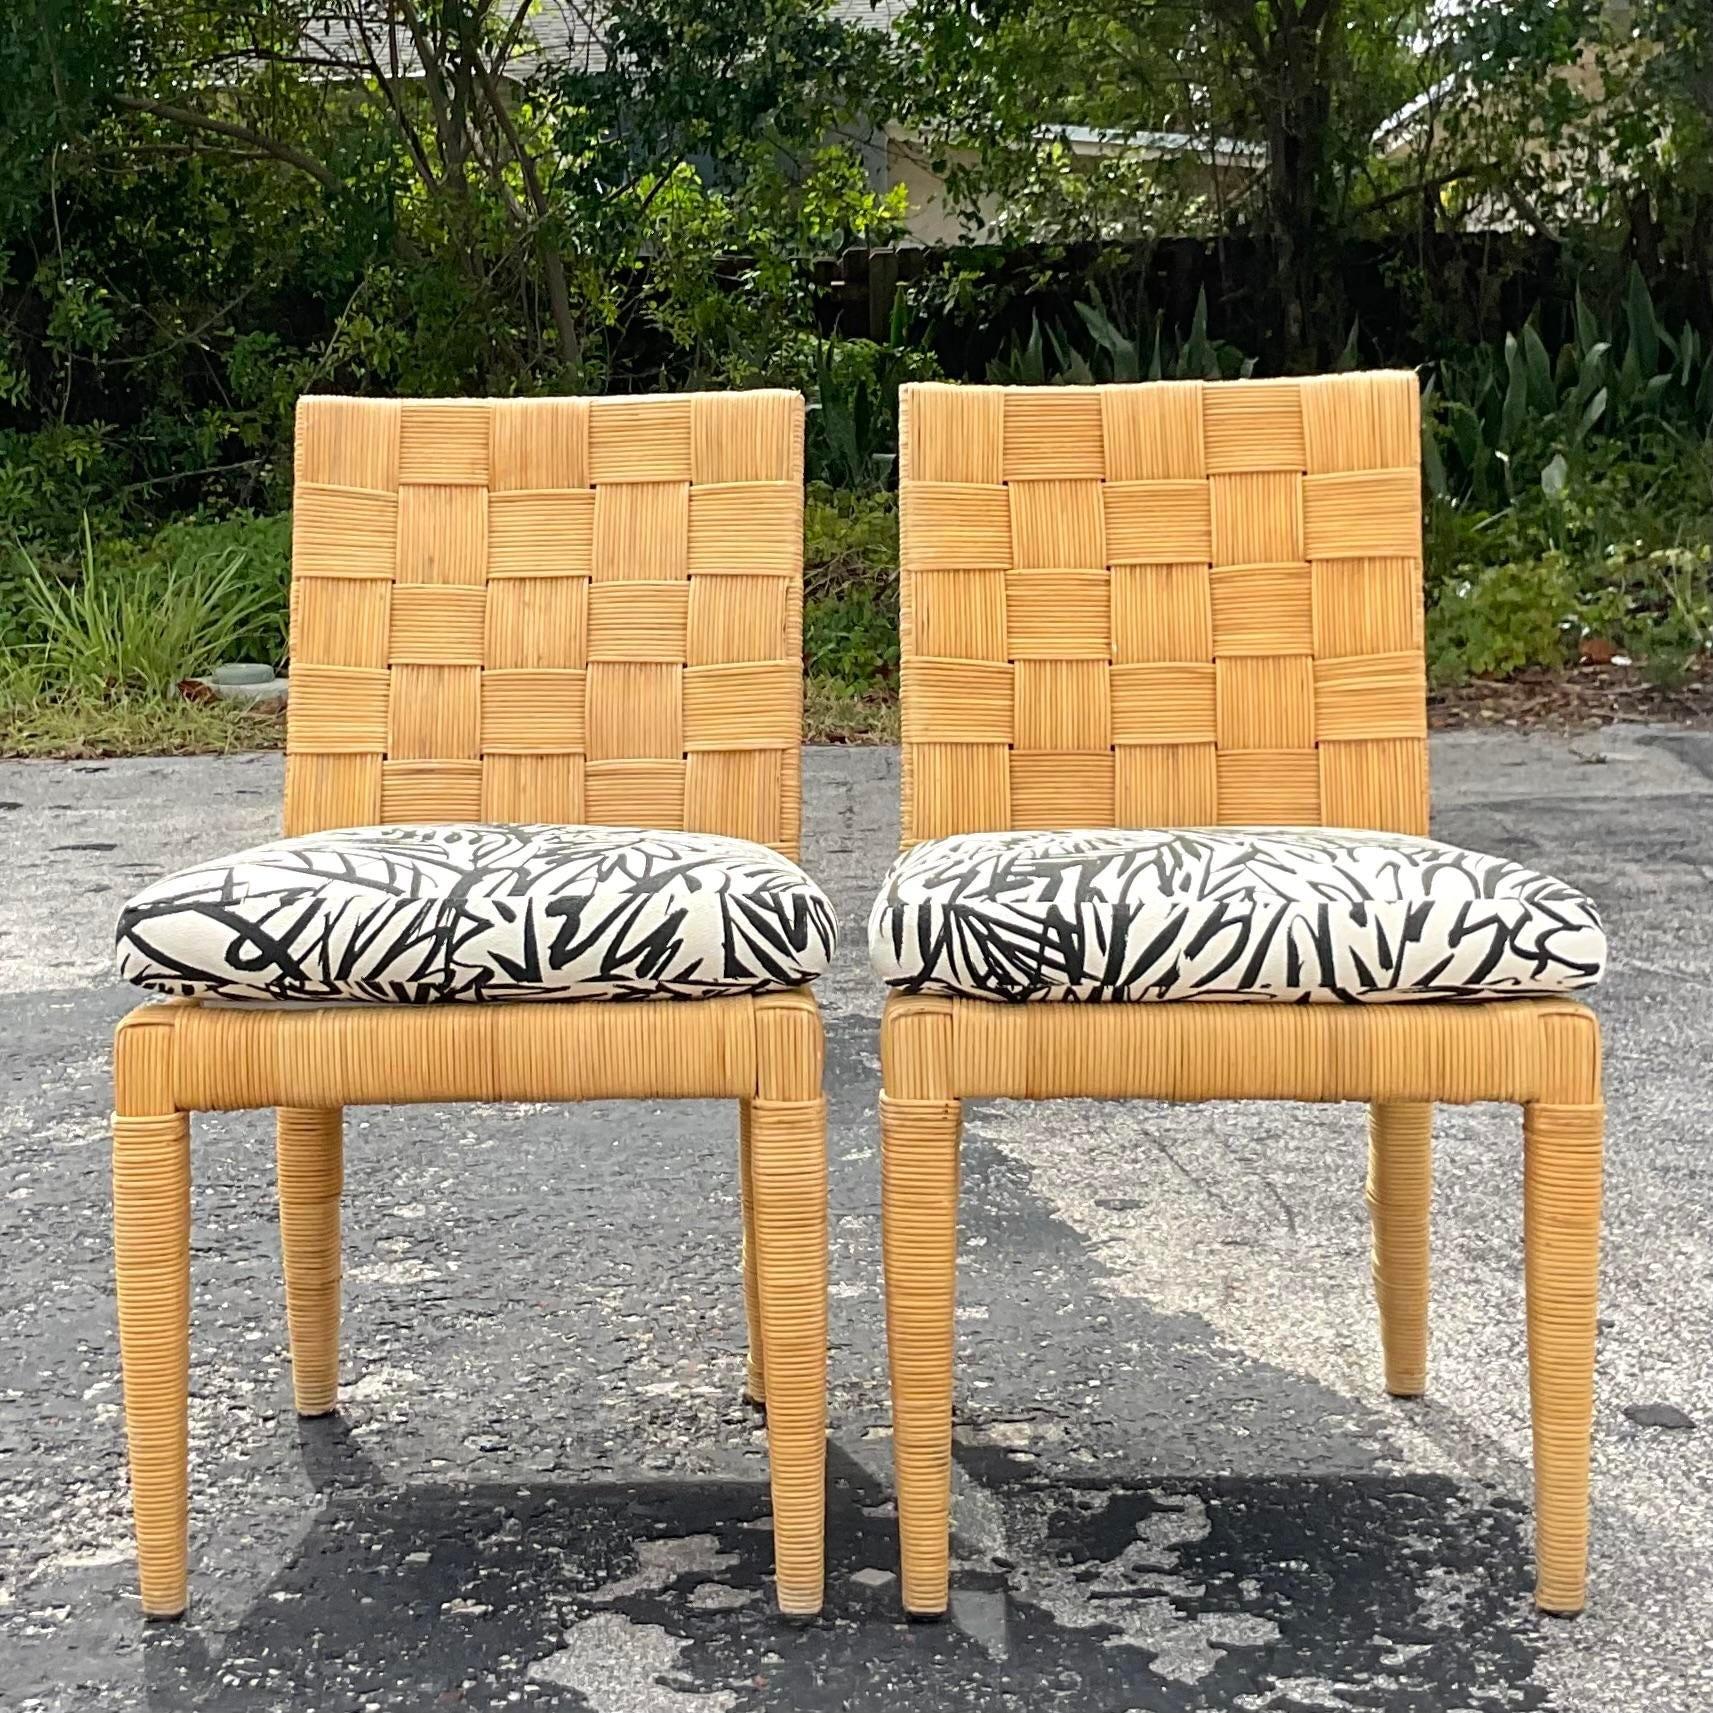 Vintage Coastal Donghia Block Island Dining Chairs - a Pair For Sale 1